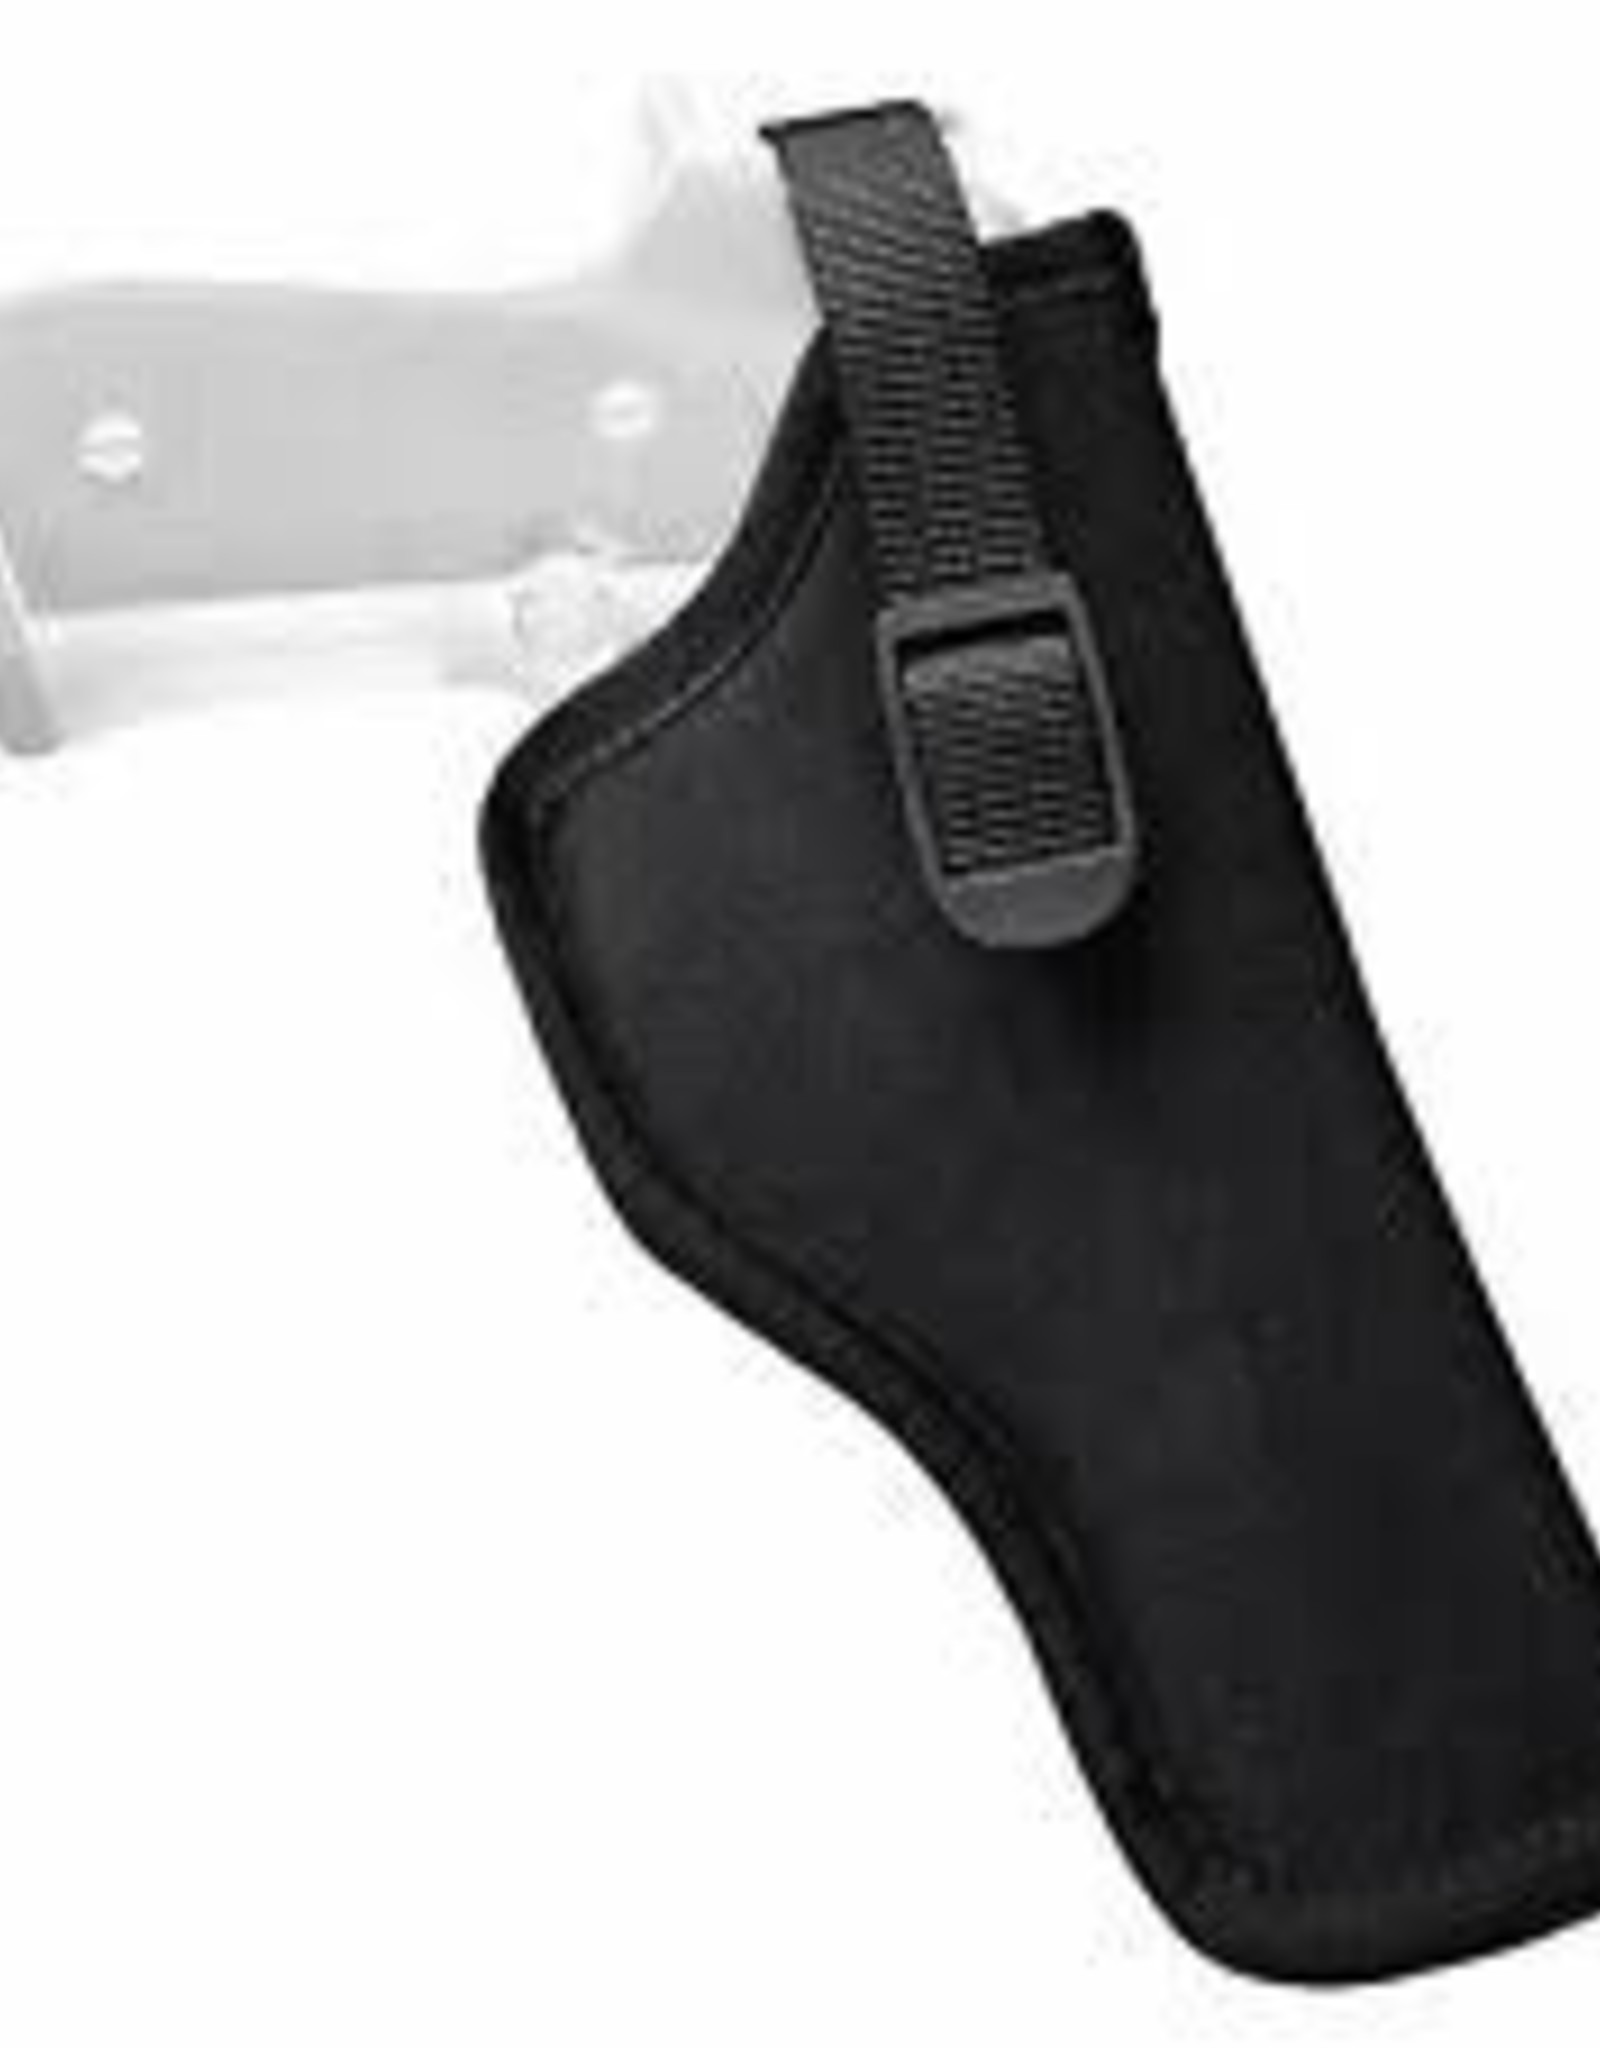 Uncle Mike’s RH BLK S/HOLSTER #4